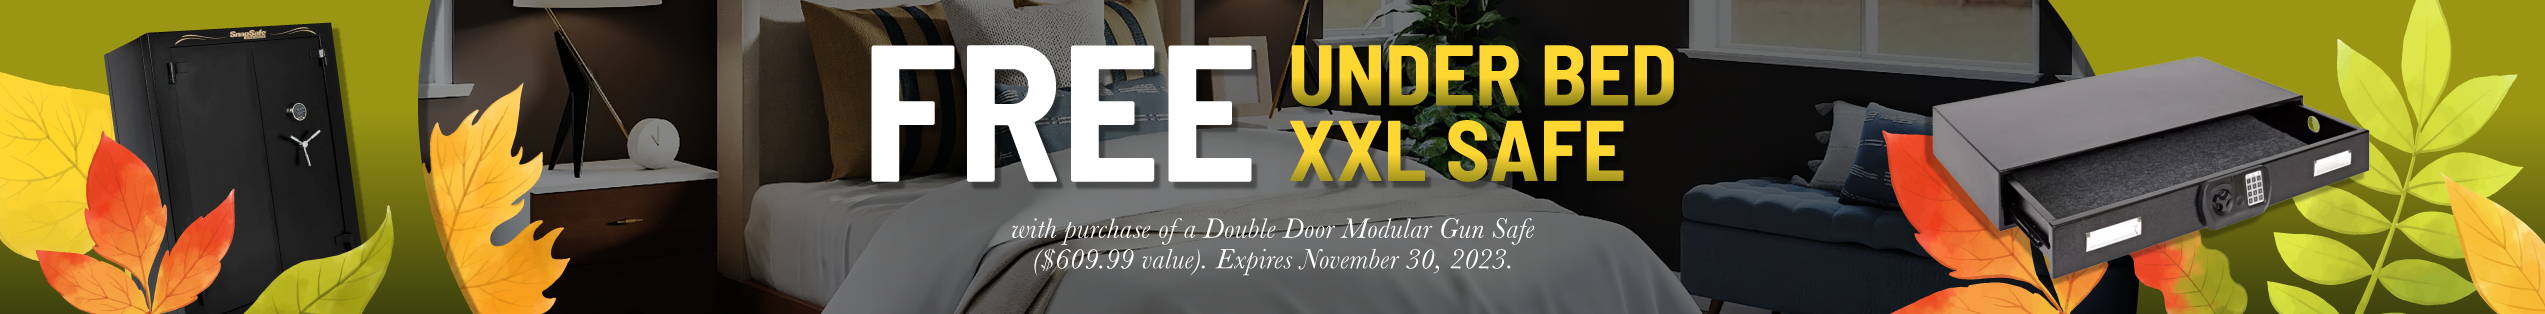 Free Under Bed XXL Safe with Purchase of Double Door Modular Gun Safe